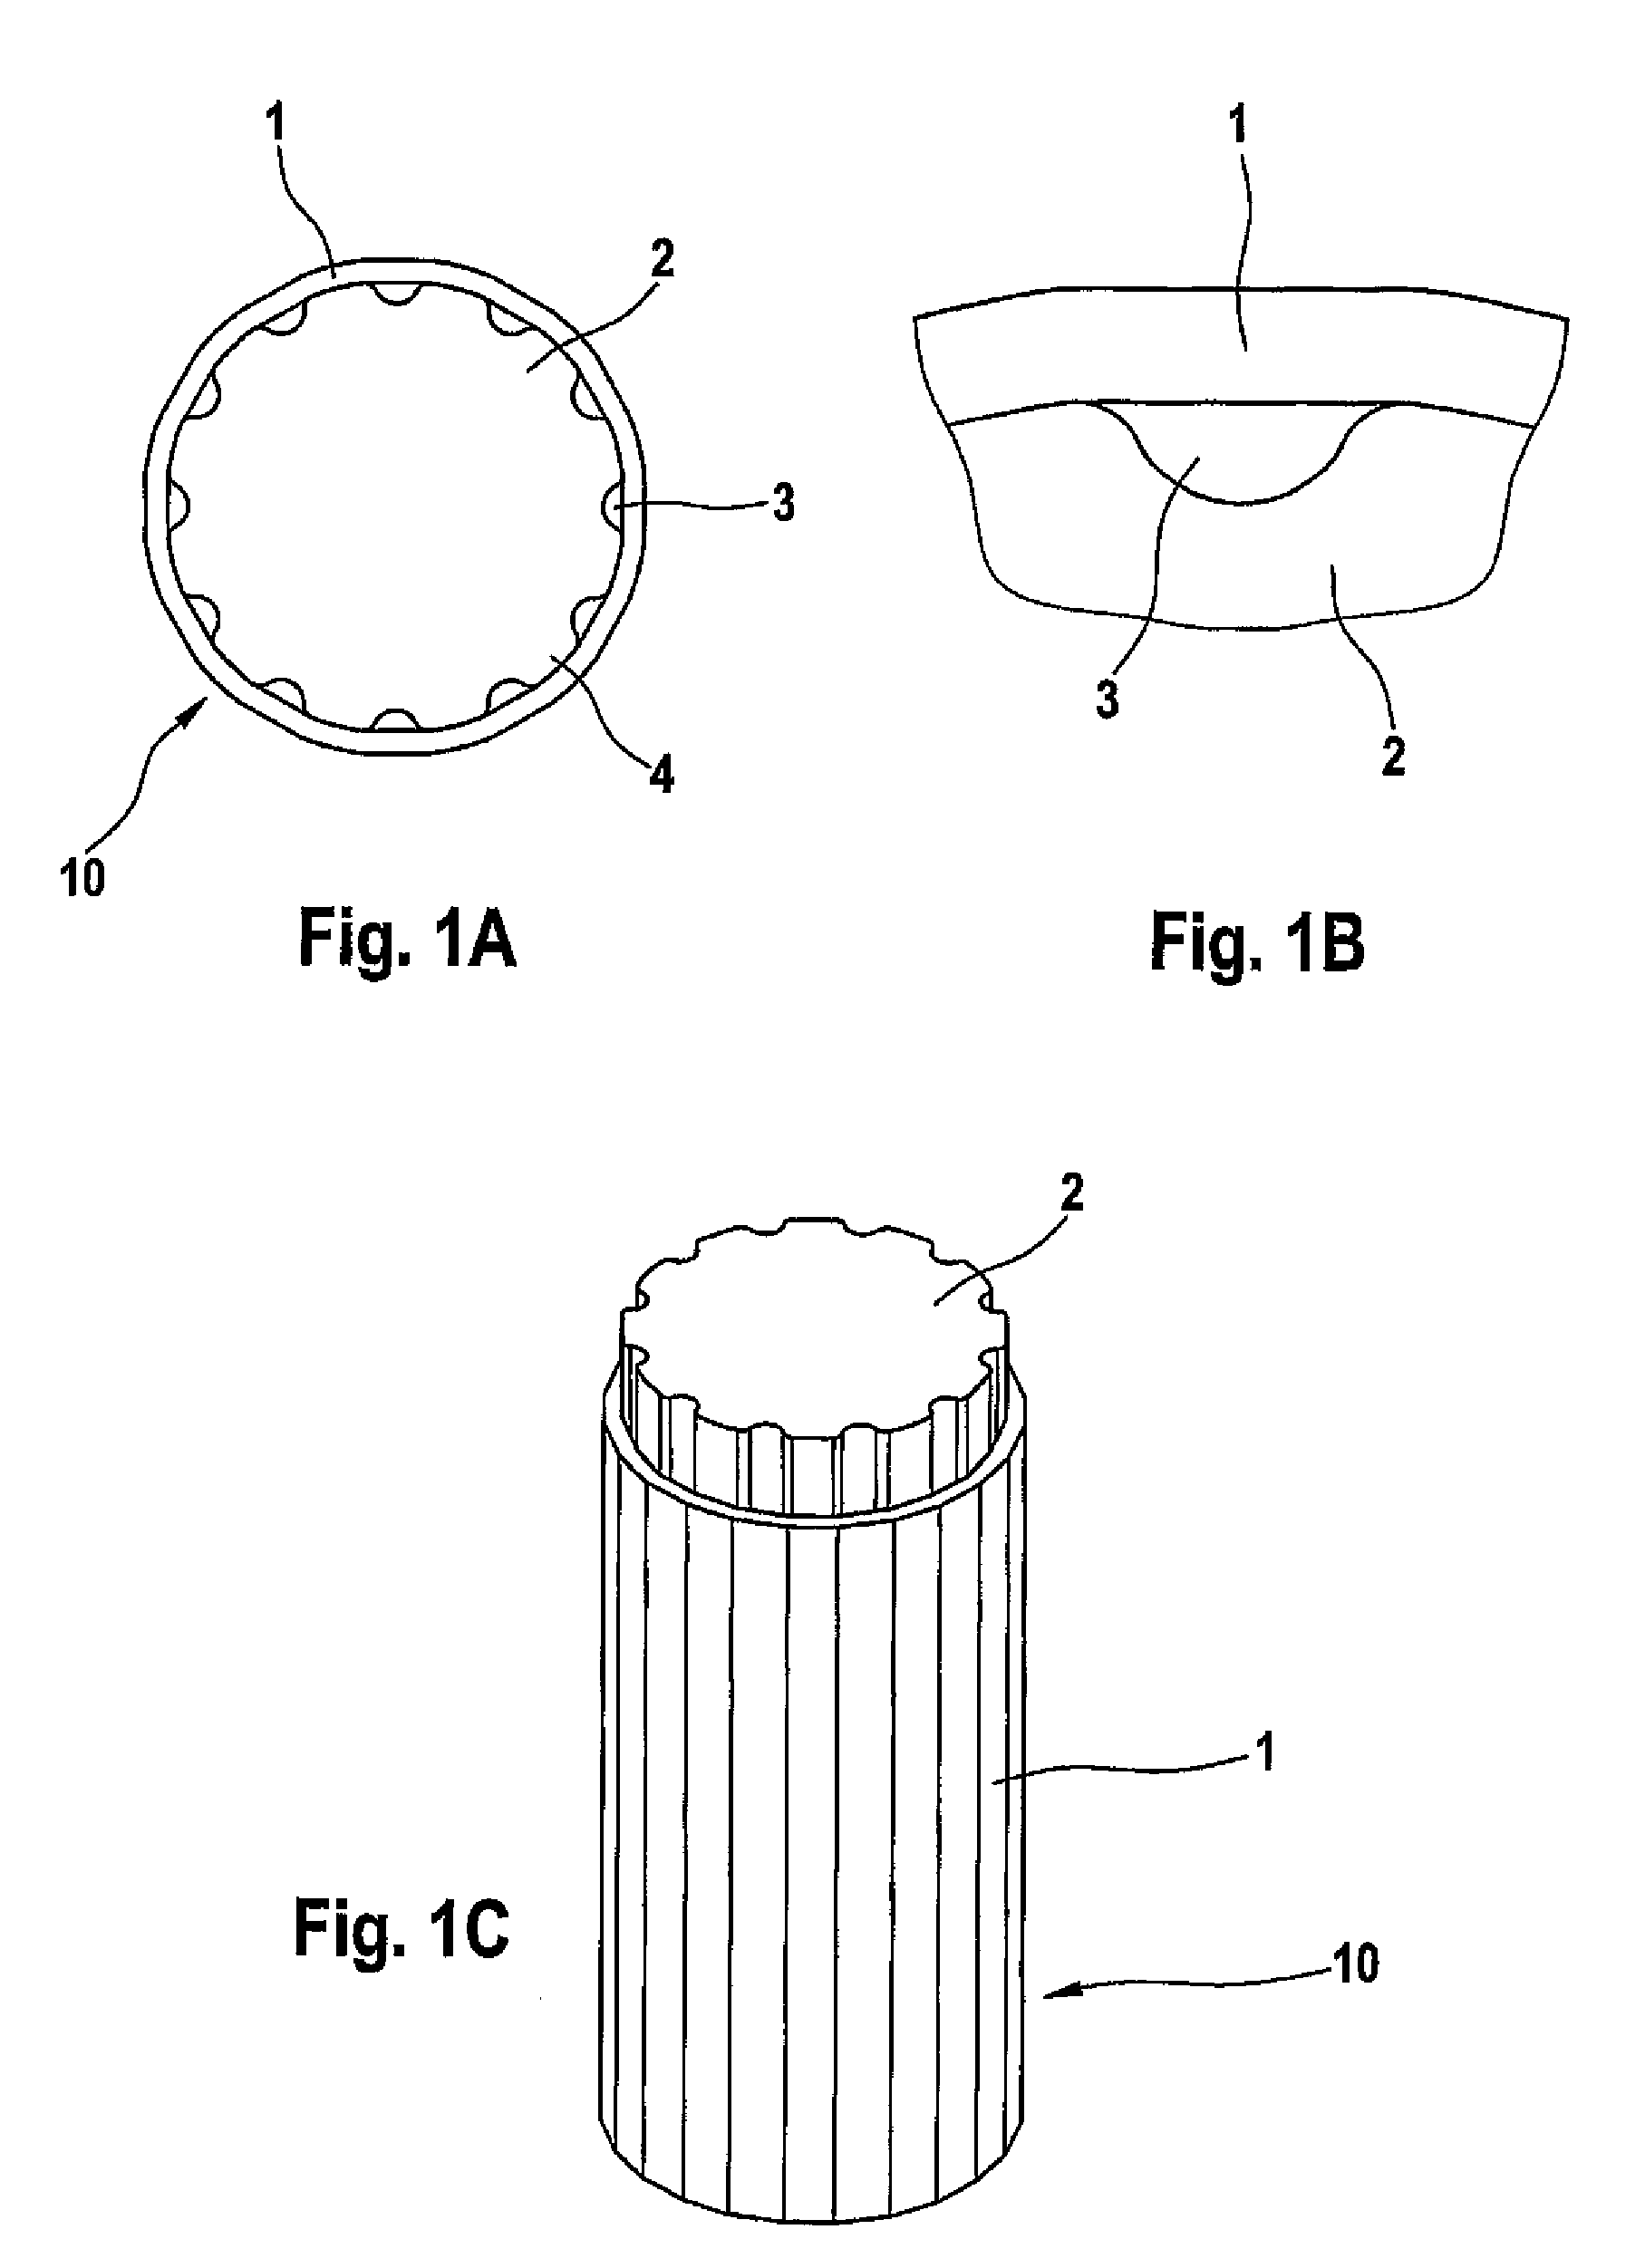 Catheter With Microchannels For Monitoring The Concentration Of An Analyte In A Bodily Fluid